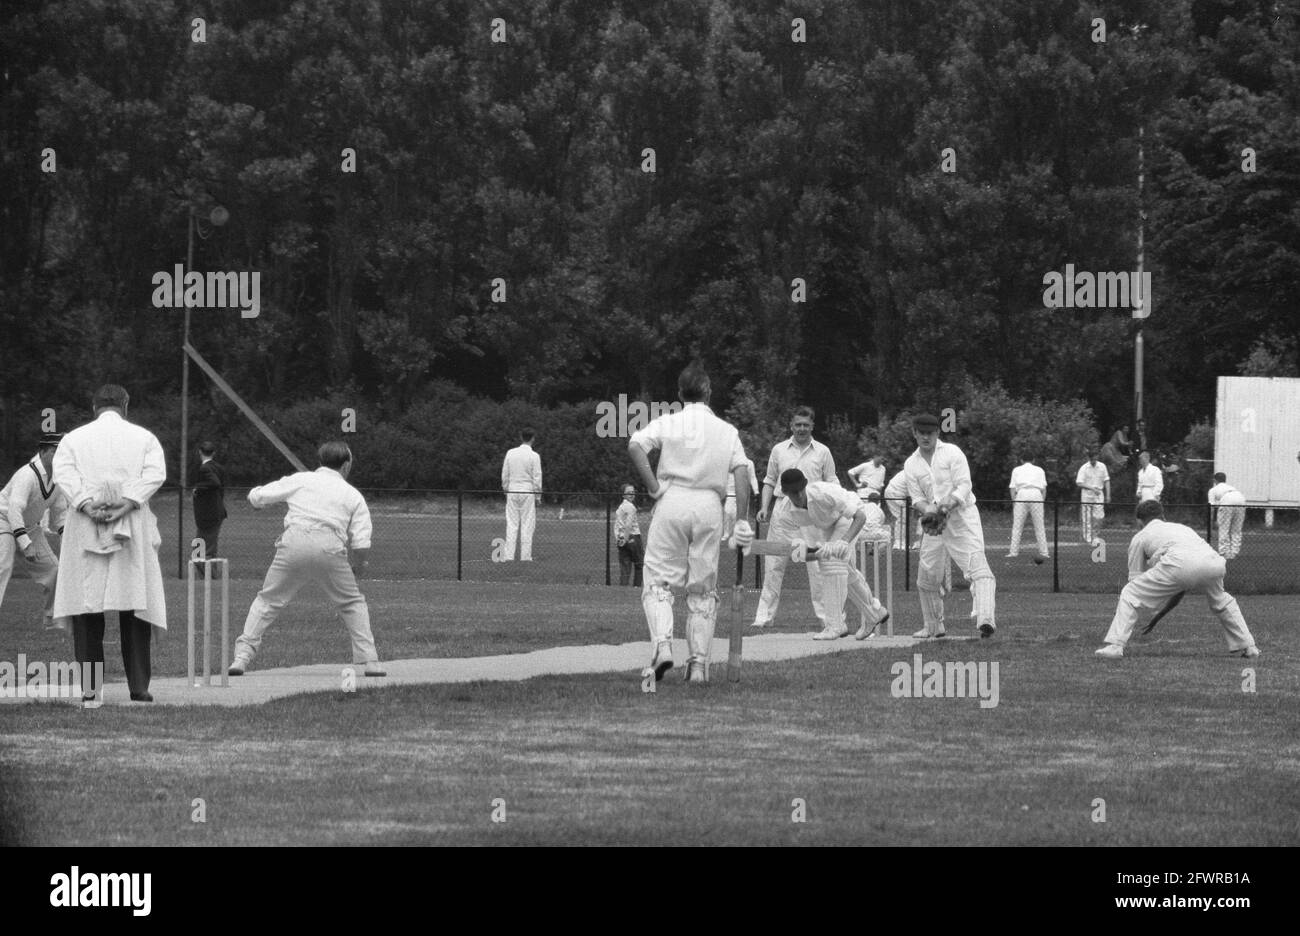 Cricket HCC against Rood en Wit in The Hague, 21 June 1959, cricket, sports, The Netherlands, 20th century press agency photo, news to remember, documentary, historic photography 1945-1990, visual stories, human history of the Twentieth Century, capturing moments in time Stock Photo